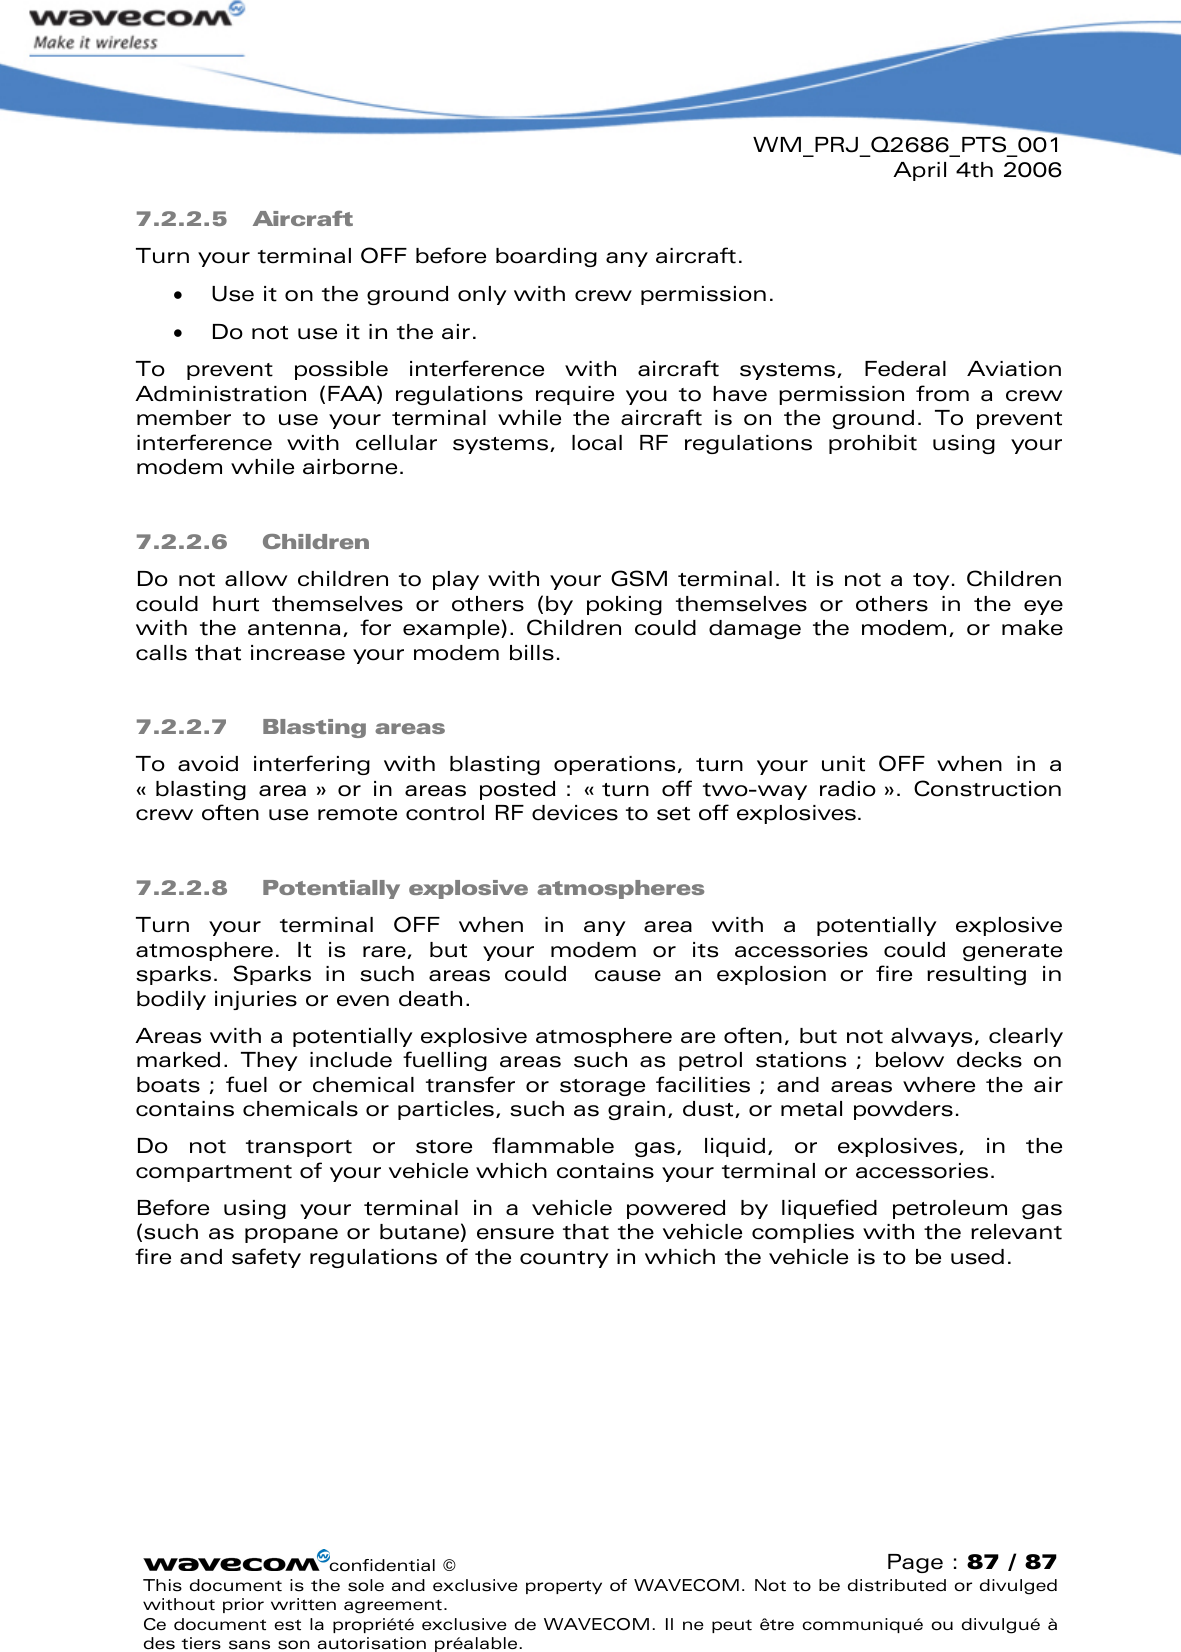 WM_PRJ_Q2686_PTS_001April 4th 2006confidential ©Page : 87 / 87This document is the sole and exclusive property of WAVECOM. Not to be distributed or divulged without prior written agreement. Ce document est la propriété exclusive de WAVECOM. Il ne peut être communiqué ou divulgué à des tiers sans son autorisation préalable.7.2.2.5 AircraftTurn your terminal OFF before boarding any aircraft.  Use it on the ground only with crew permission.  Do not use it in the air.To  prevent  possible  interference  with  aircraft  systems,  Federal  Aviation Administration (FAA)  regulations require  you to have  permission from a crew member  to  use your  terminal  while  the  aircraft  is on  the  ground.  To  prevent interference  with  cellular  systems,  local  RF  regulations  prohibit  using  your modem while airborne.7.2.2.6 ChildrenDo not allow children to play with your GSM terminal. It is not a toy. Children could  hurt  themselves  or  others  (by  poking  themselves  or  others  in  the  eye with  the  antenna,  for  example).  Children  could  damage  the  modem,  or make calls that increase your modem bills.7.2.2.7 Blasting areasTo  avoid  interfering  with  blasting  operations,  turn  your  unit  OFF  when  in  a «blasting  area » or  in  areas  posted :  «turn  off two-way  radio ».  Construction crew often use remote control RF devices to set off explosives.7.2.2.8 Potentially explosive atmospheresTurn  your  terminal  OFF when  in  any  area  with  a  potentially  explosive atmosphere.  It  is  rare,  but  your  modem  or  its  accessories  could  generatesparks.  Sparks  in  such  areas  could  cause  an  explosion  or  fire  resulting  in bodily injuries or even death.Areas with a potentially explosive atmosphere are often, but not always, clearly marked.  They  include  fuelling  areas  such  as  petrol  stations ;  below decks on boats ; fuel or chemical transfer or storage facilities ; and areas where the air contains chemicals or particles, such as grain, dust, or metal powders.Do  not  transport  or  store  flammable  gas,  liquid,  or  explosives,  in  the compartment of your vehicle which contains your terminal or accessories.Before  using  your  terminal  in  a  vehicle  powered  by  liquefied  petroleum  gas (such as propane or butane) ensure that the vehicle complies with the relevant fire and safety regulations of the country in which the vehicle is to be used.